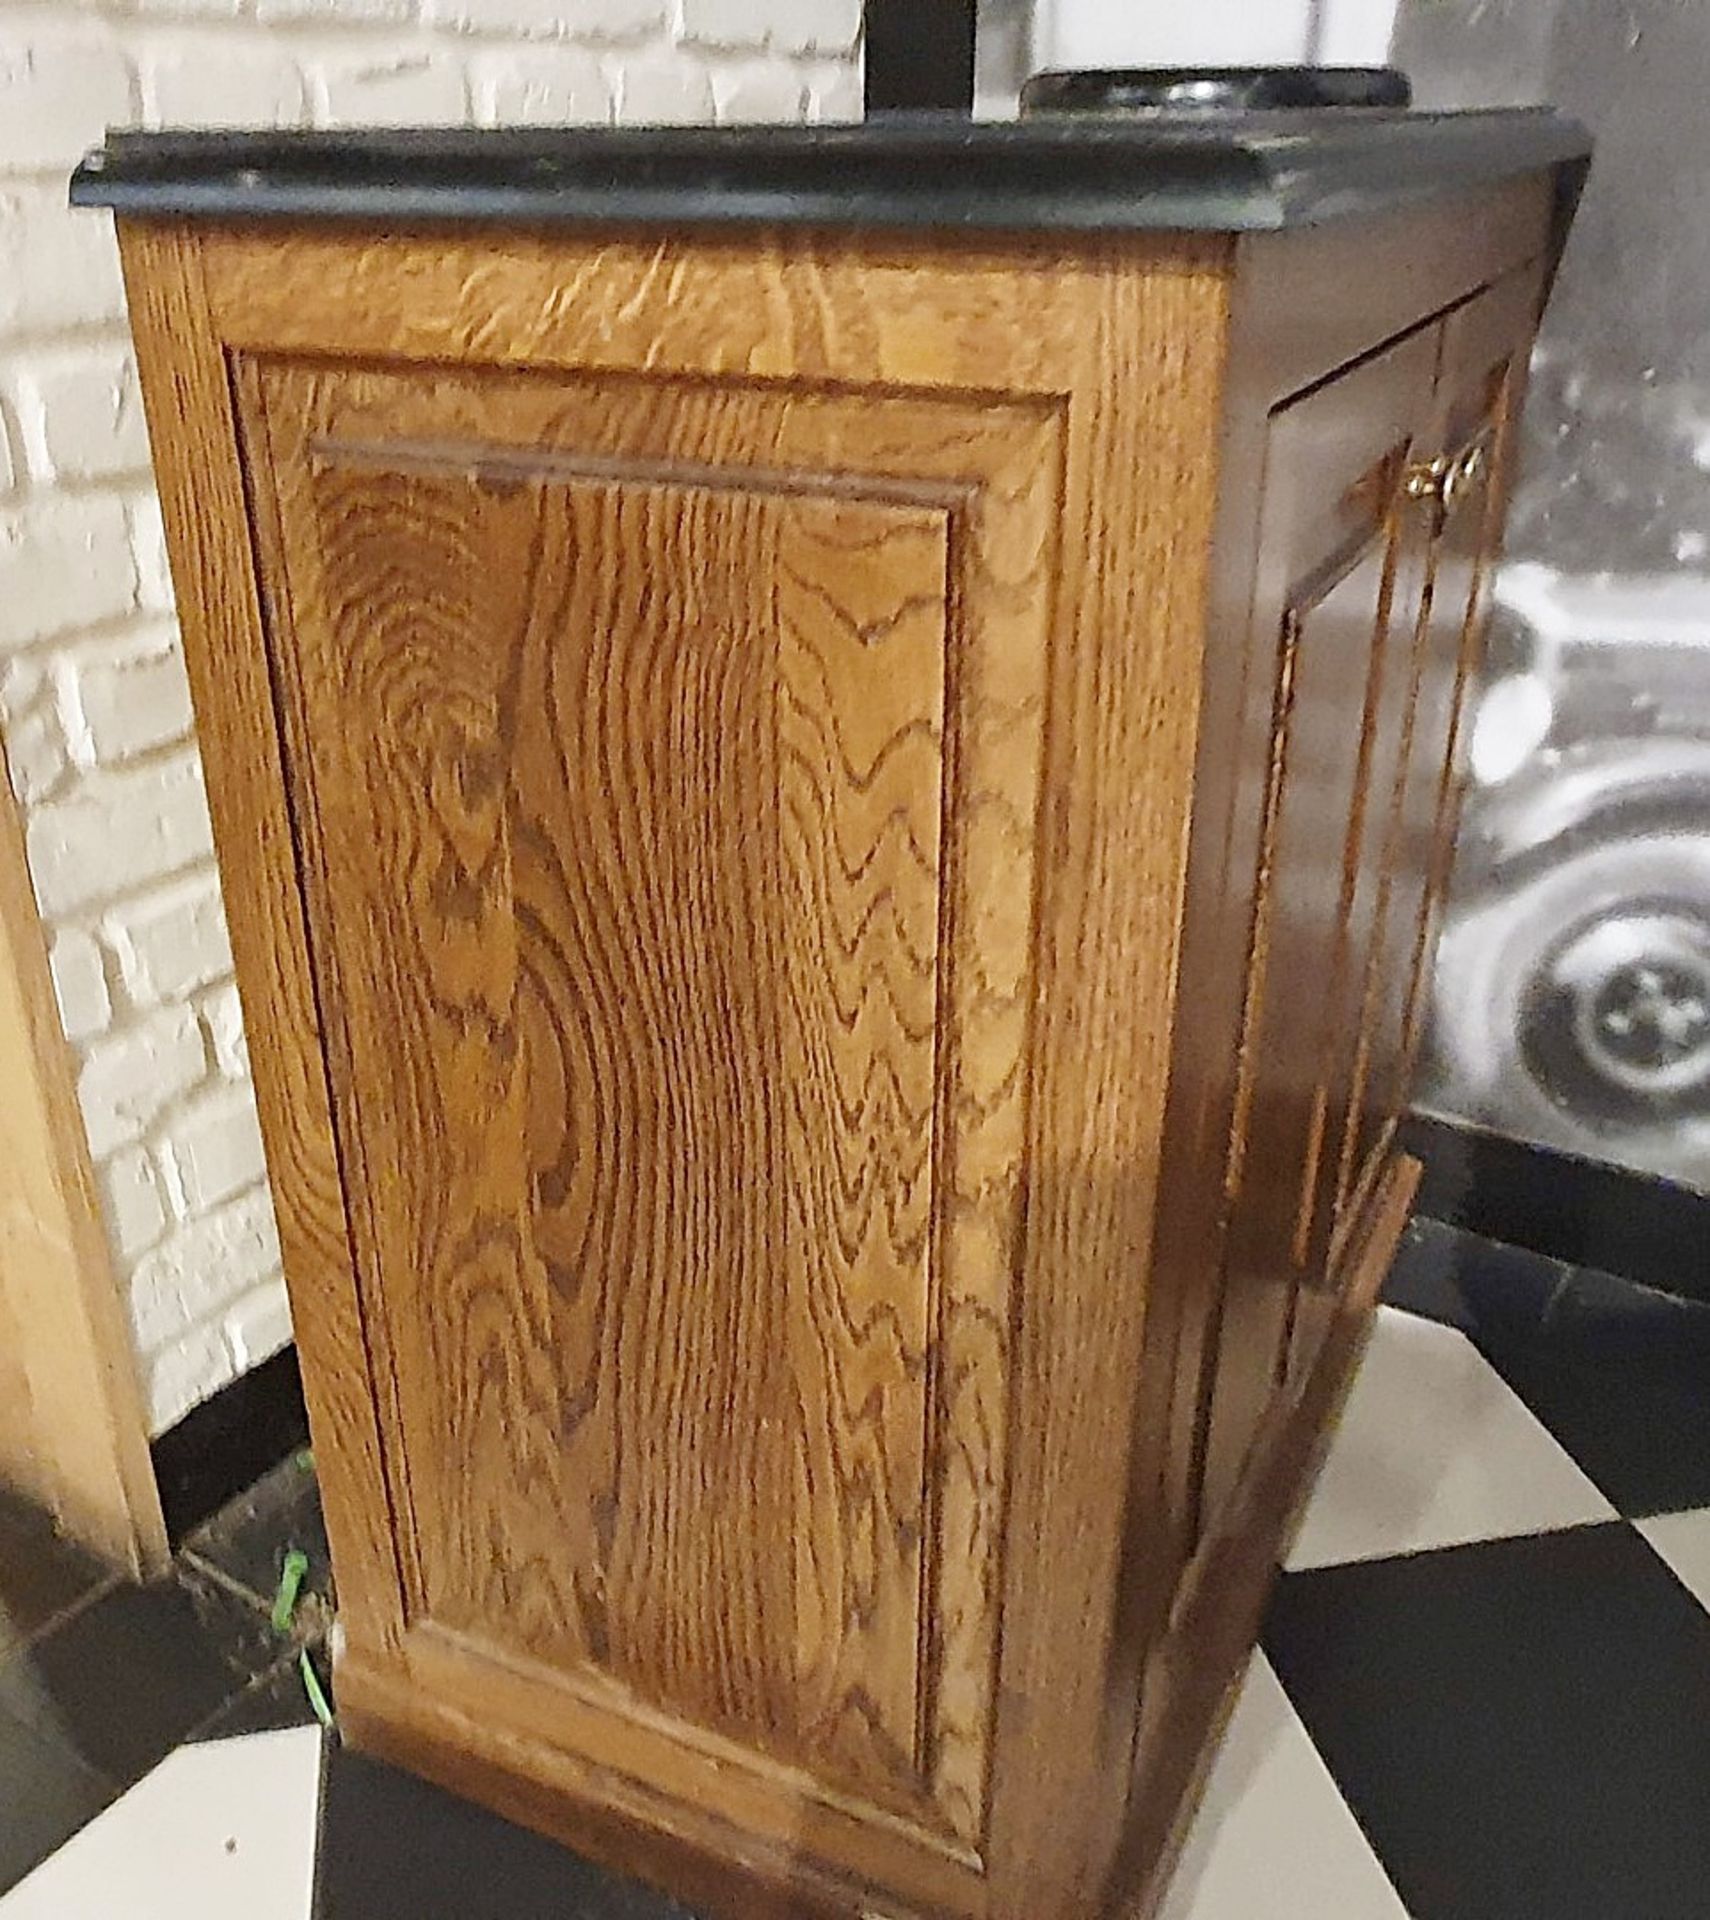 1 x Waitress / Waiter Service Cabinet in Walnut With Granite Surface and Cup Disposal Chute - H90 - Bild 8 aus 8